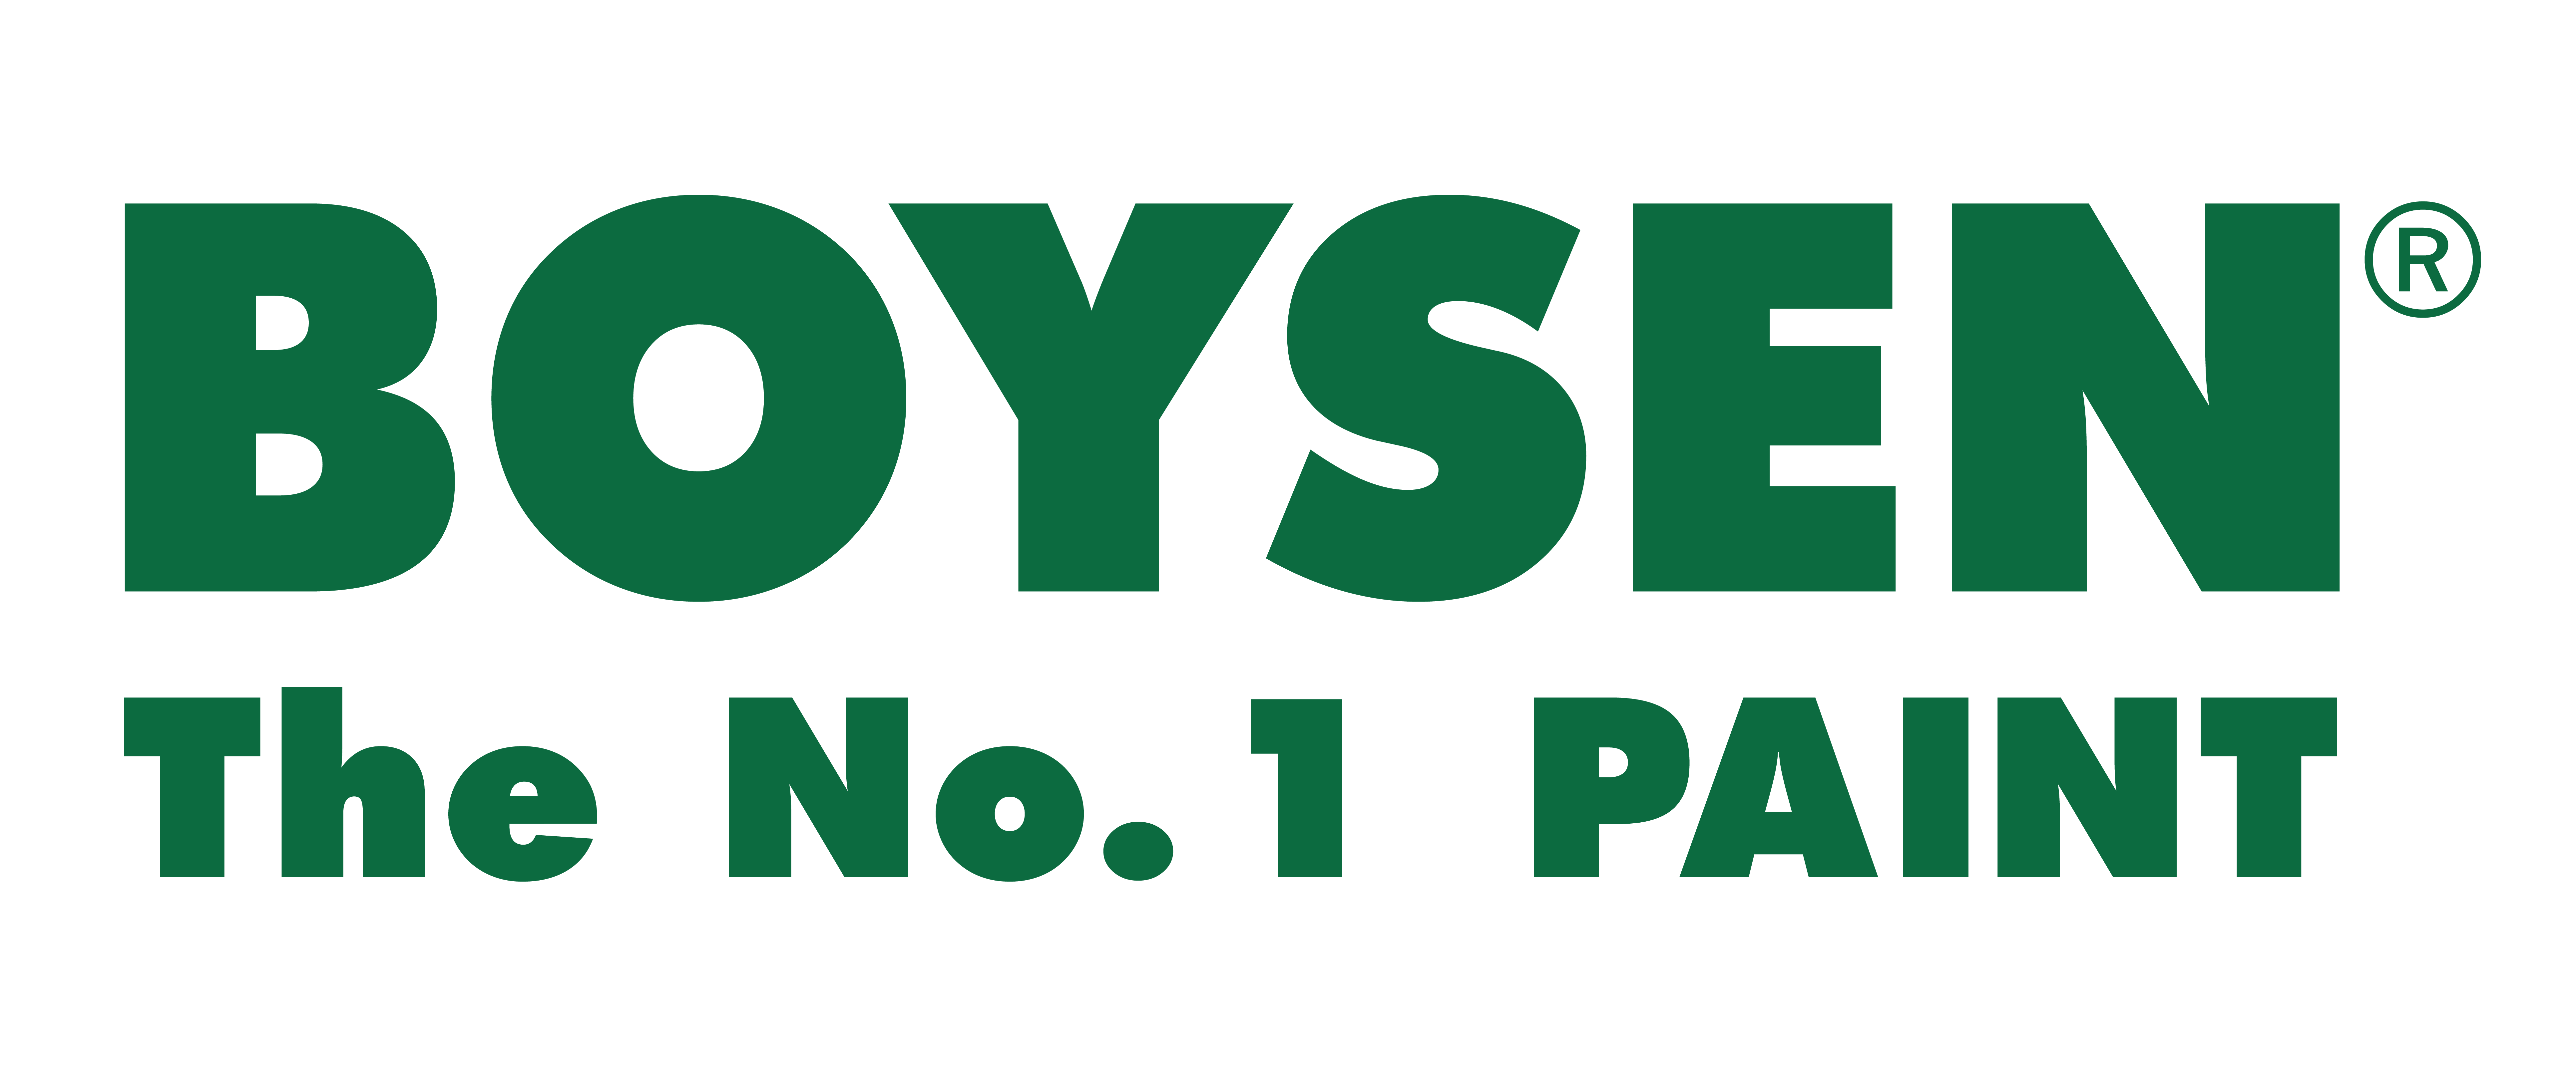 Boysen ® - The Number 1 Paint Brand in the Philippines